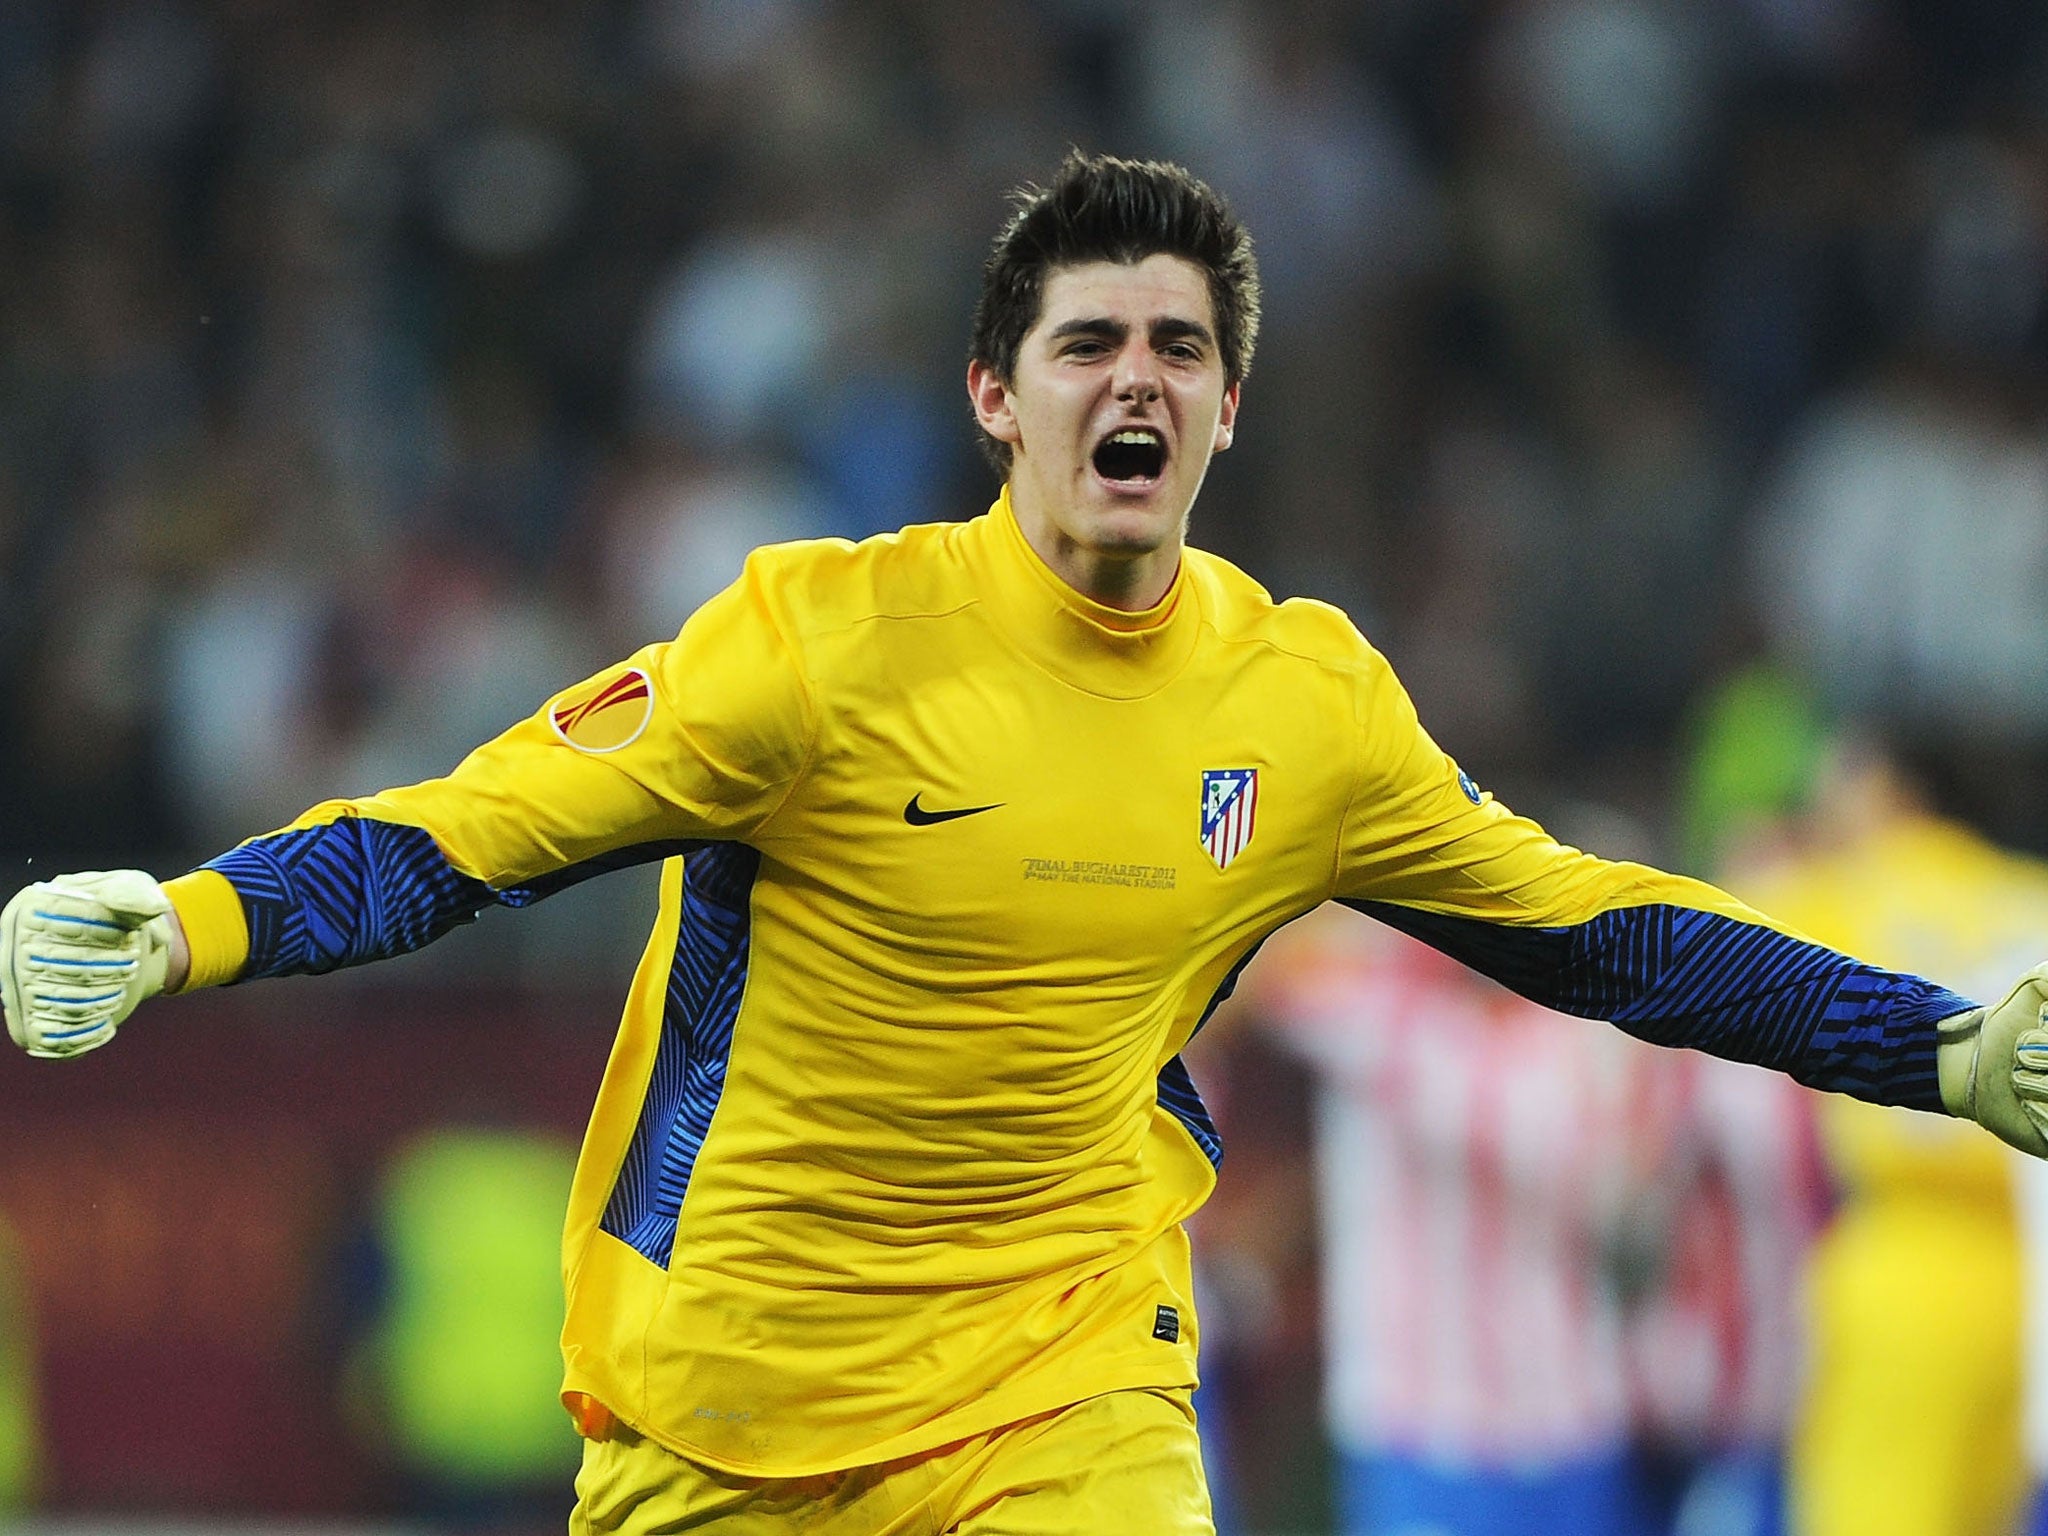 Thibault Courtois will not be joining Barcelona at the end of the season, claims his father